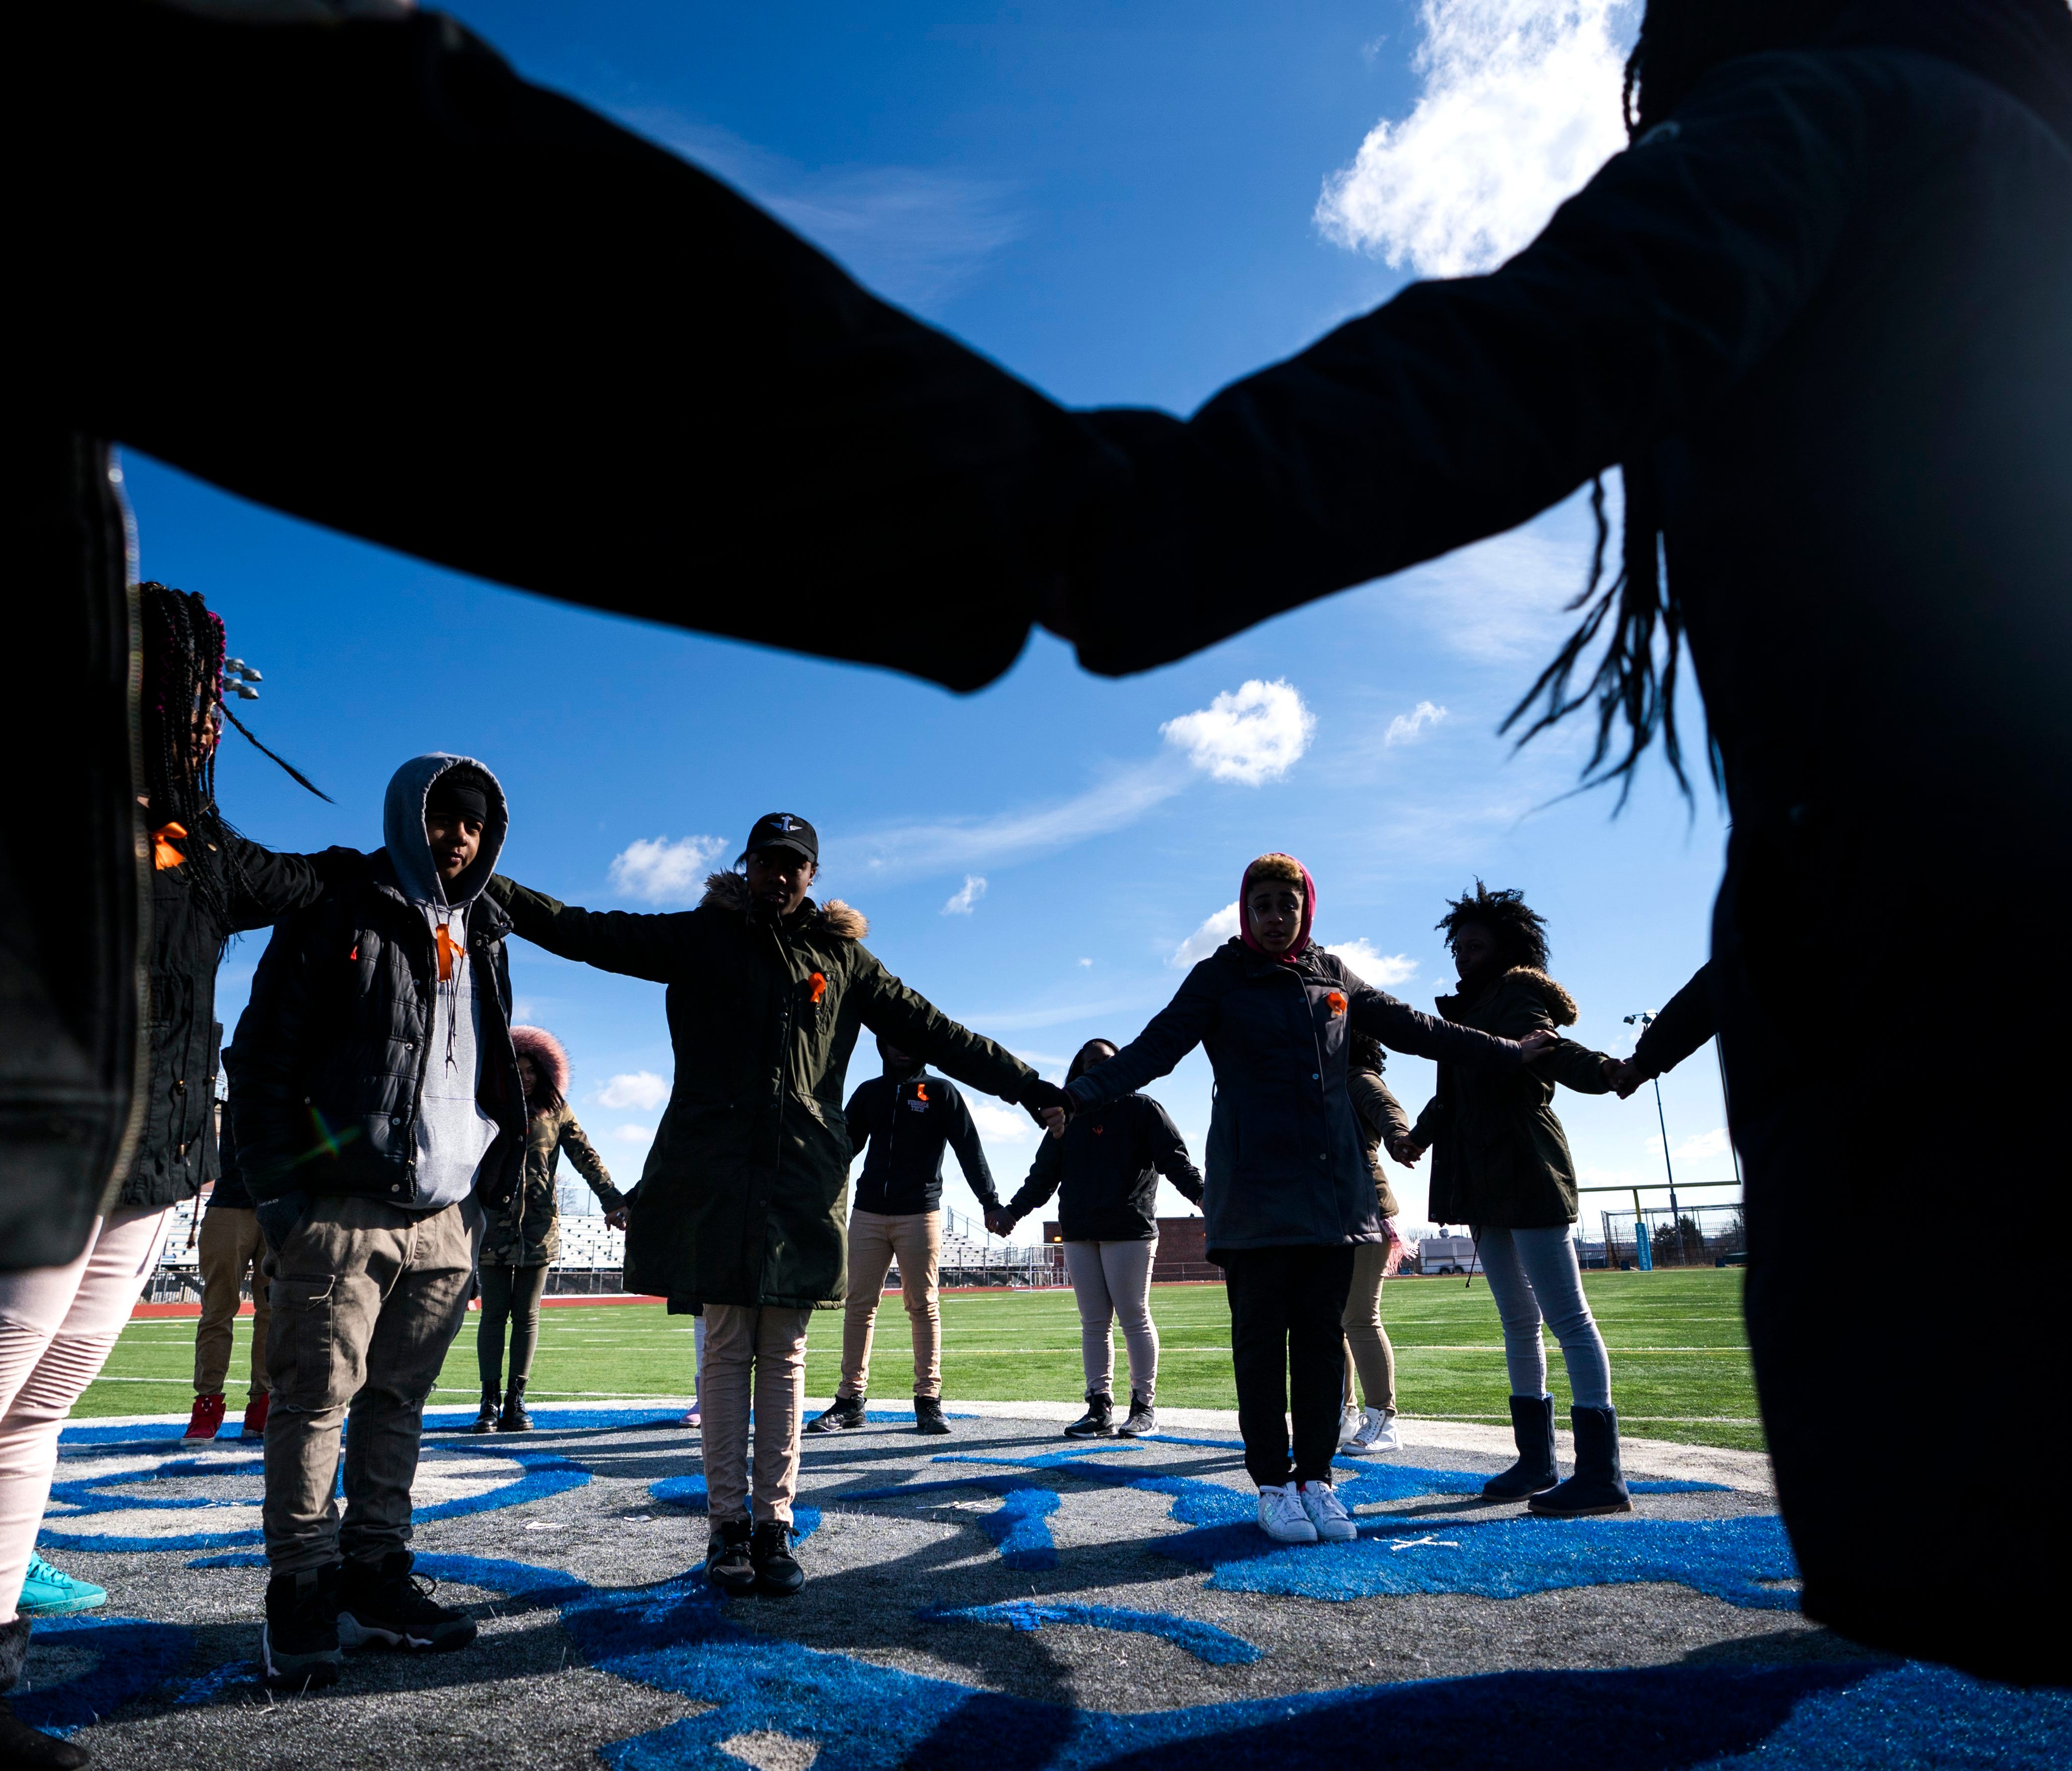 Eastern High School students walk out of class and assemble on their football field for the National School Walkout, a nation-wide protest against gun violence, in Washington, DC.